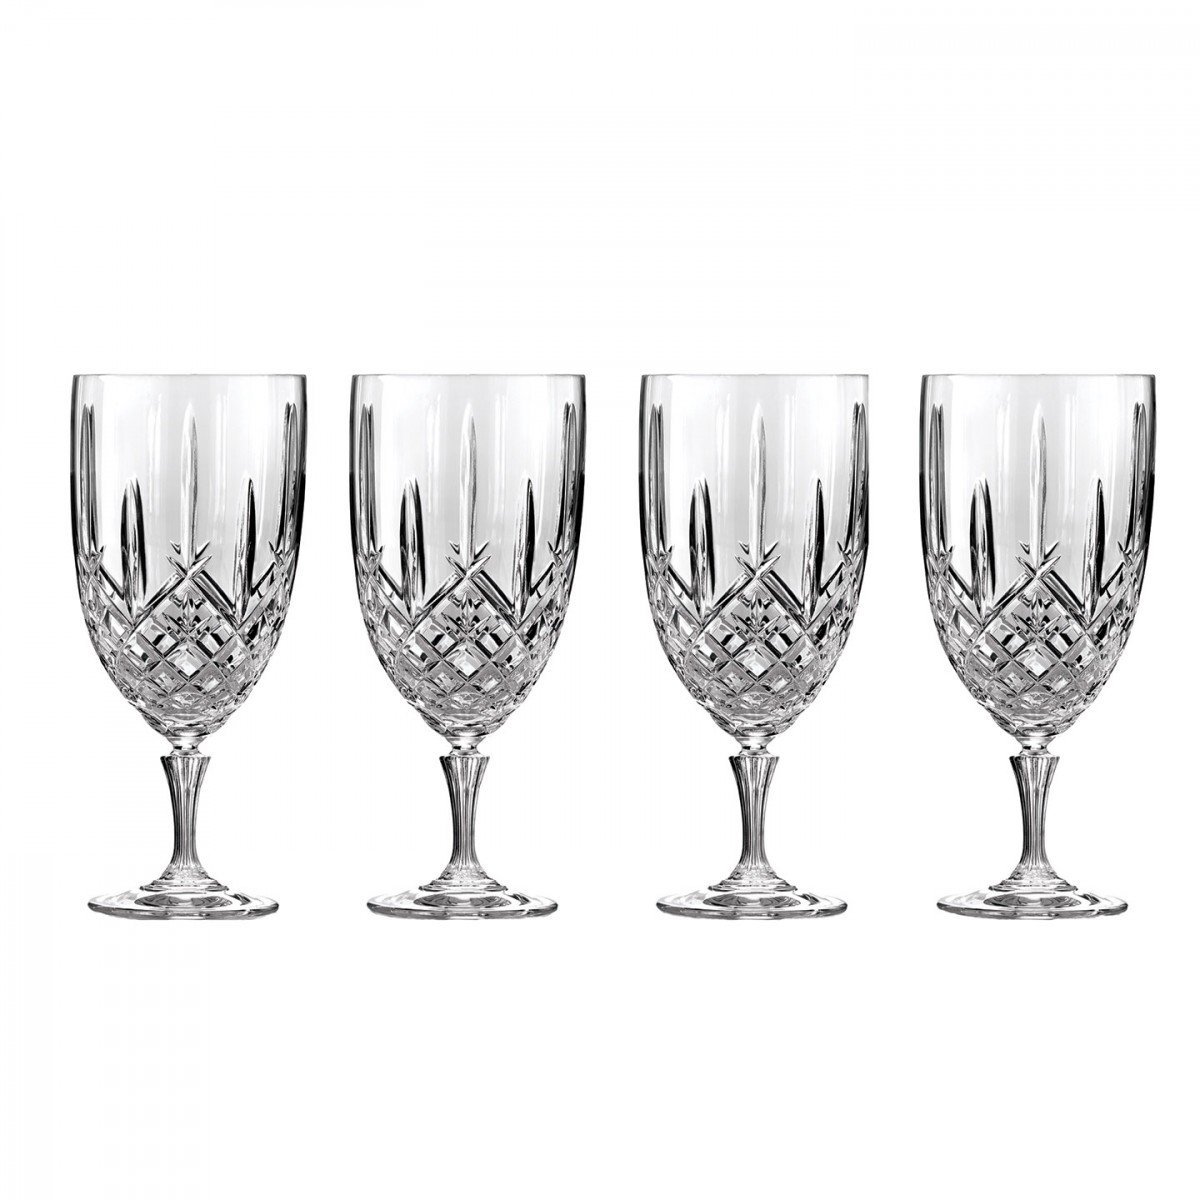 Marquis by Waterford, On Sale, Free Shipping | Crystal Classics